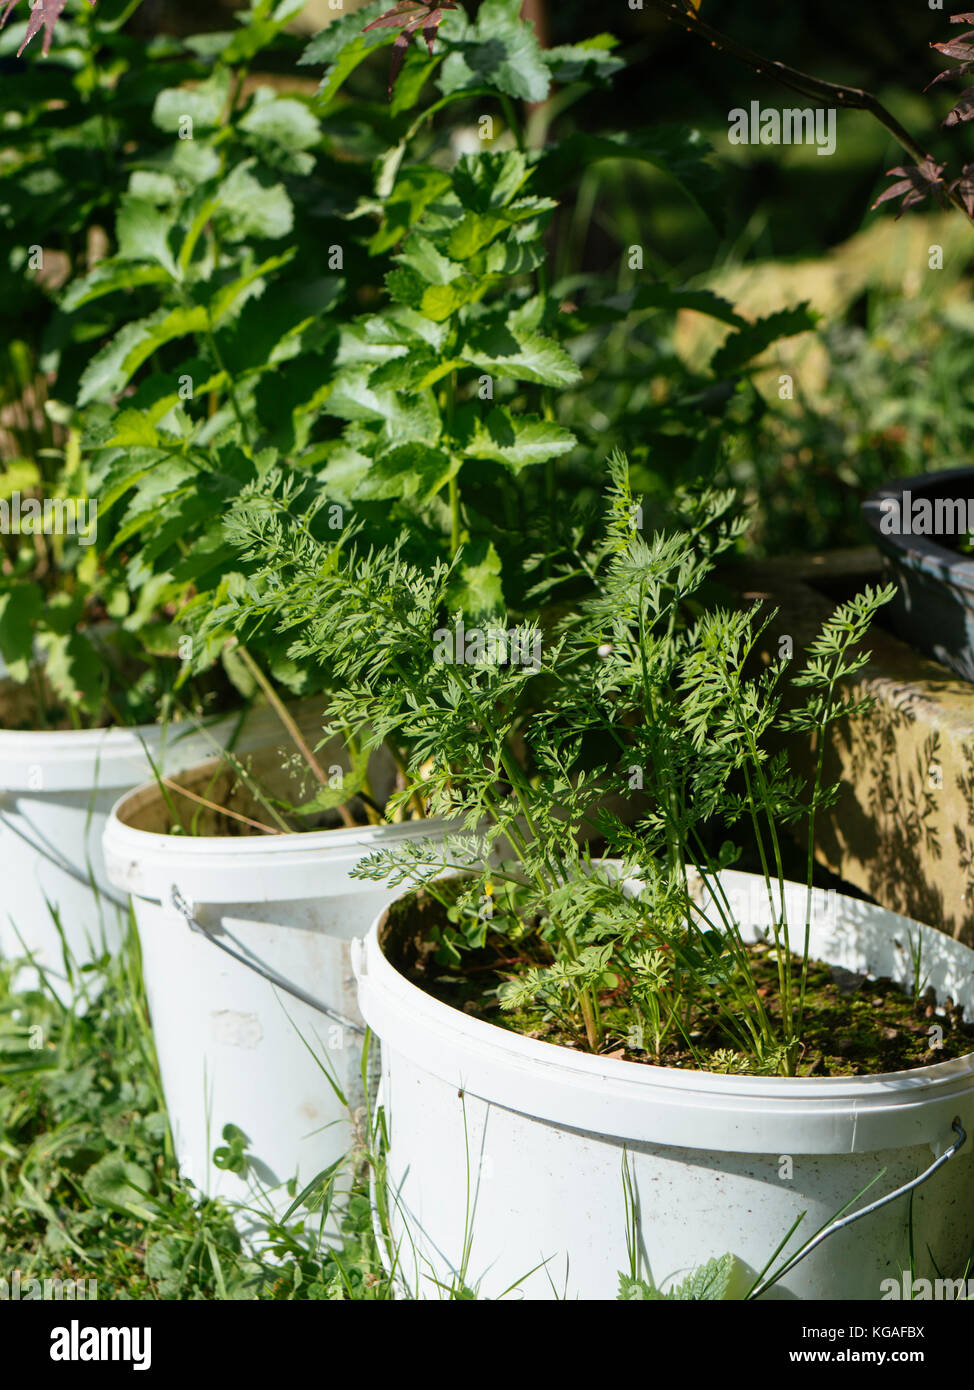 Carrots and parsnip growing in old paint buckets. Stock Photo